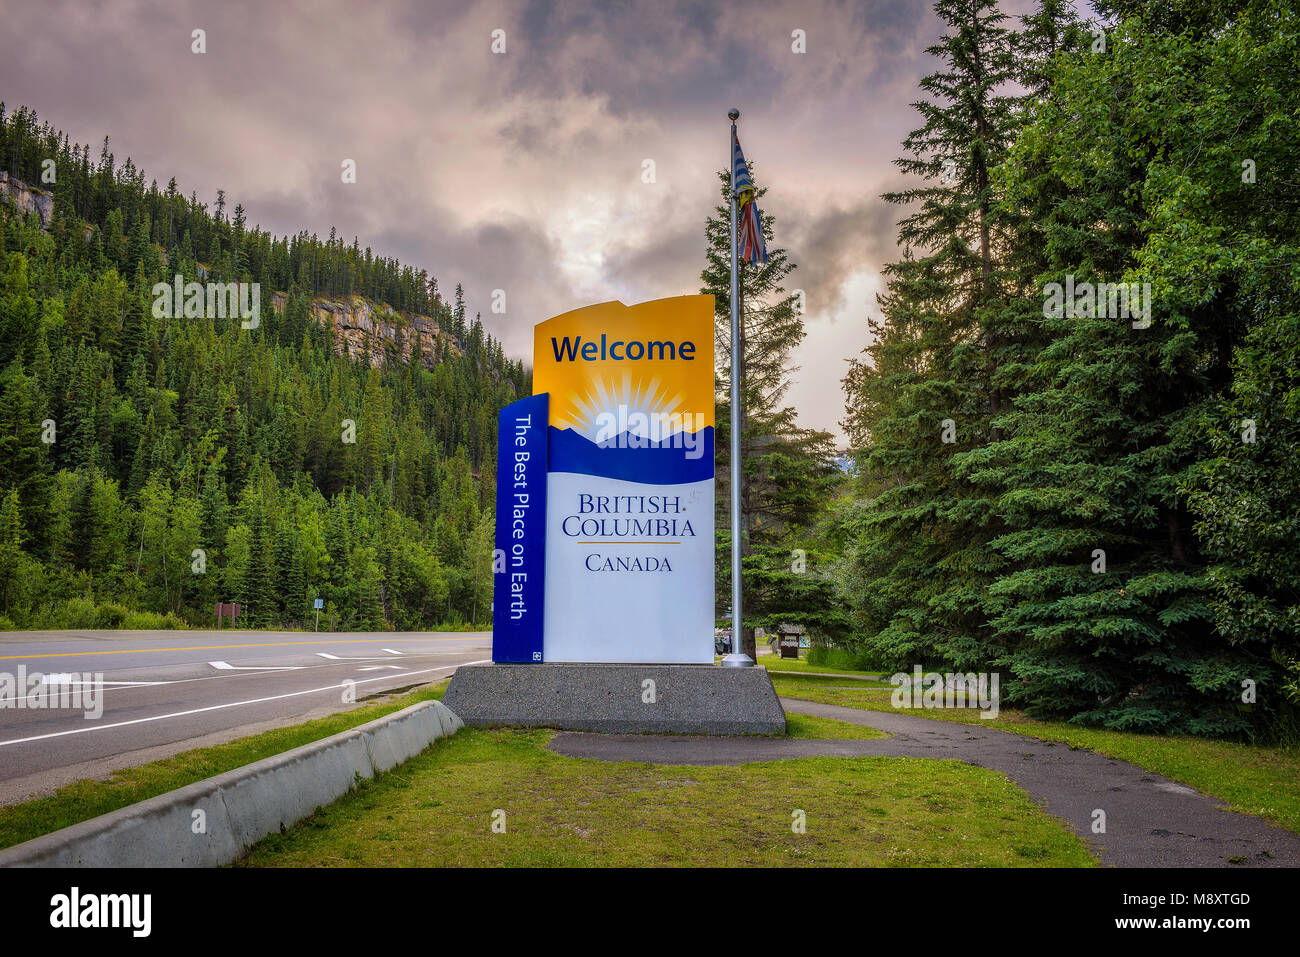 Welcome sign to the British Columbia state of Canada Stock Photo